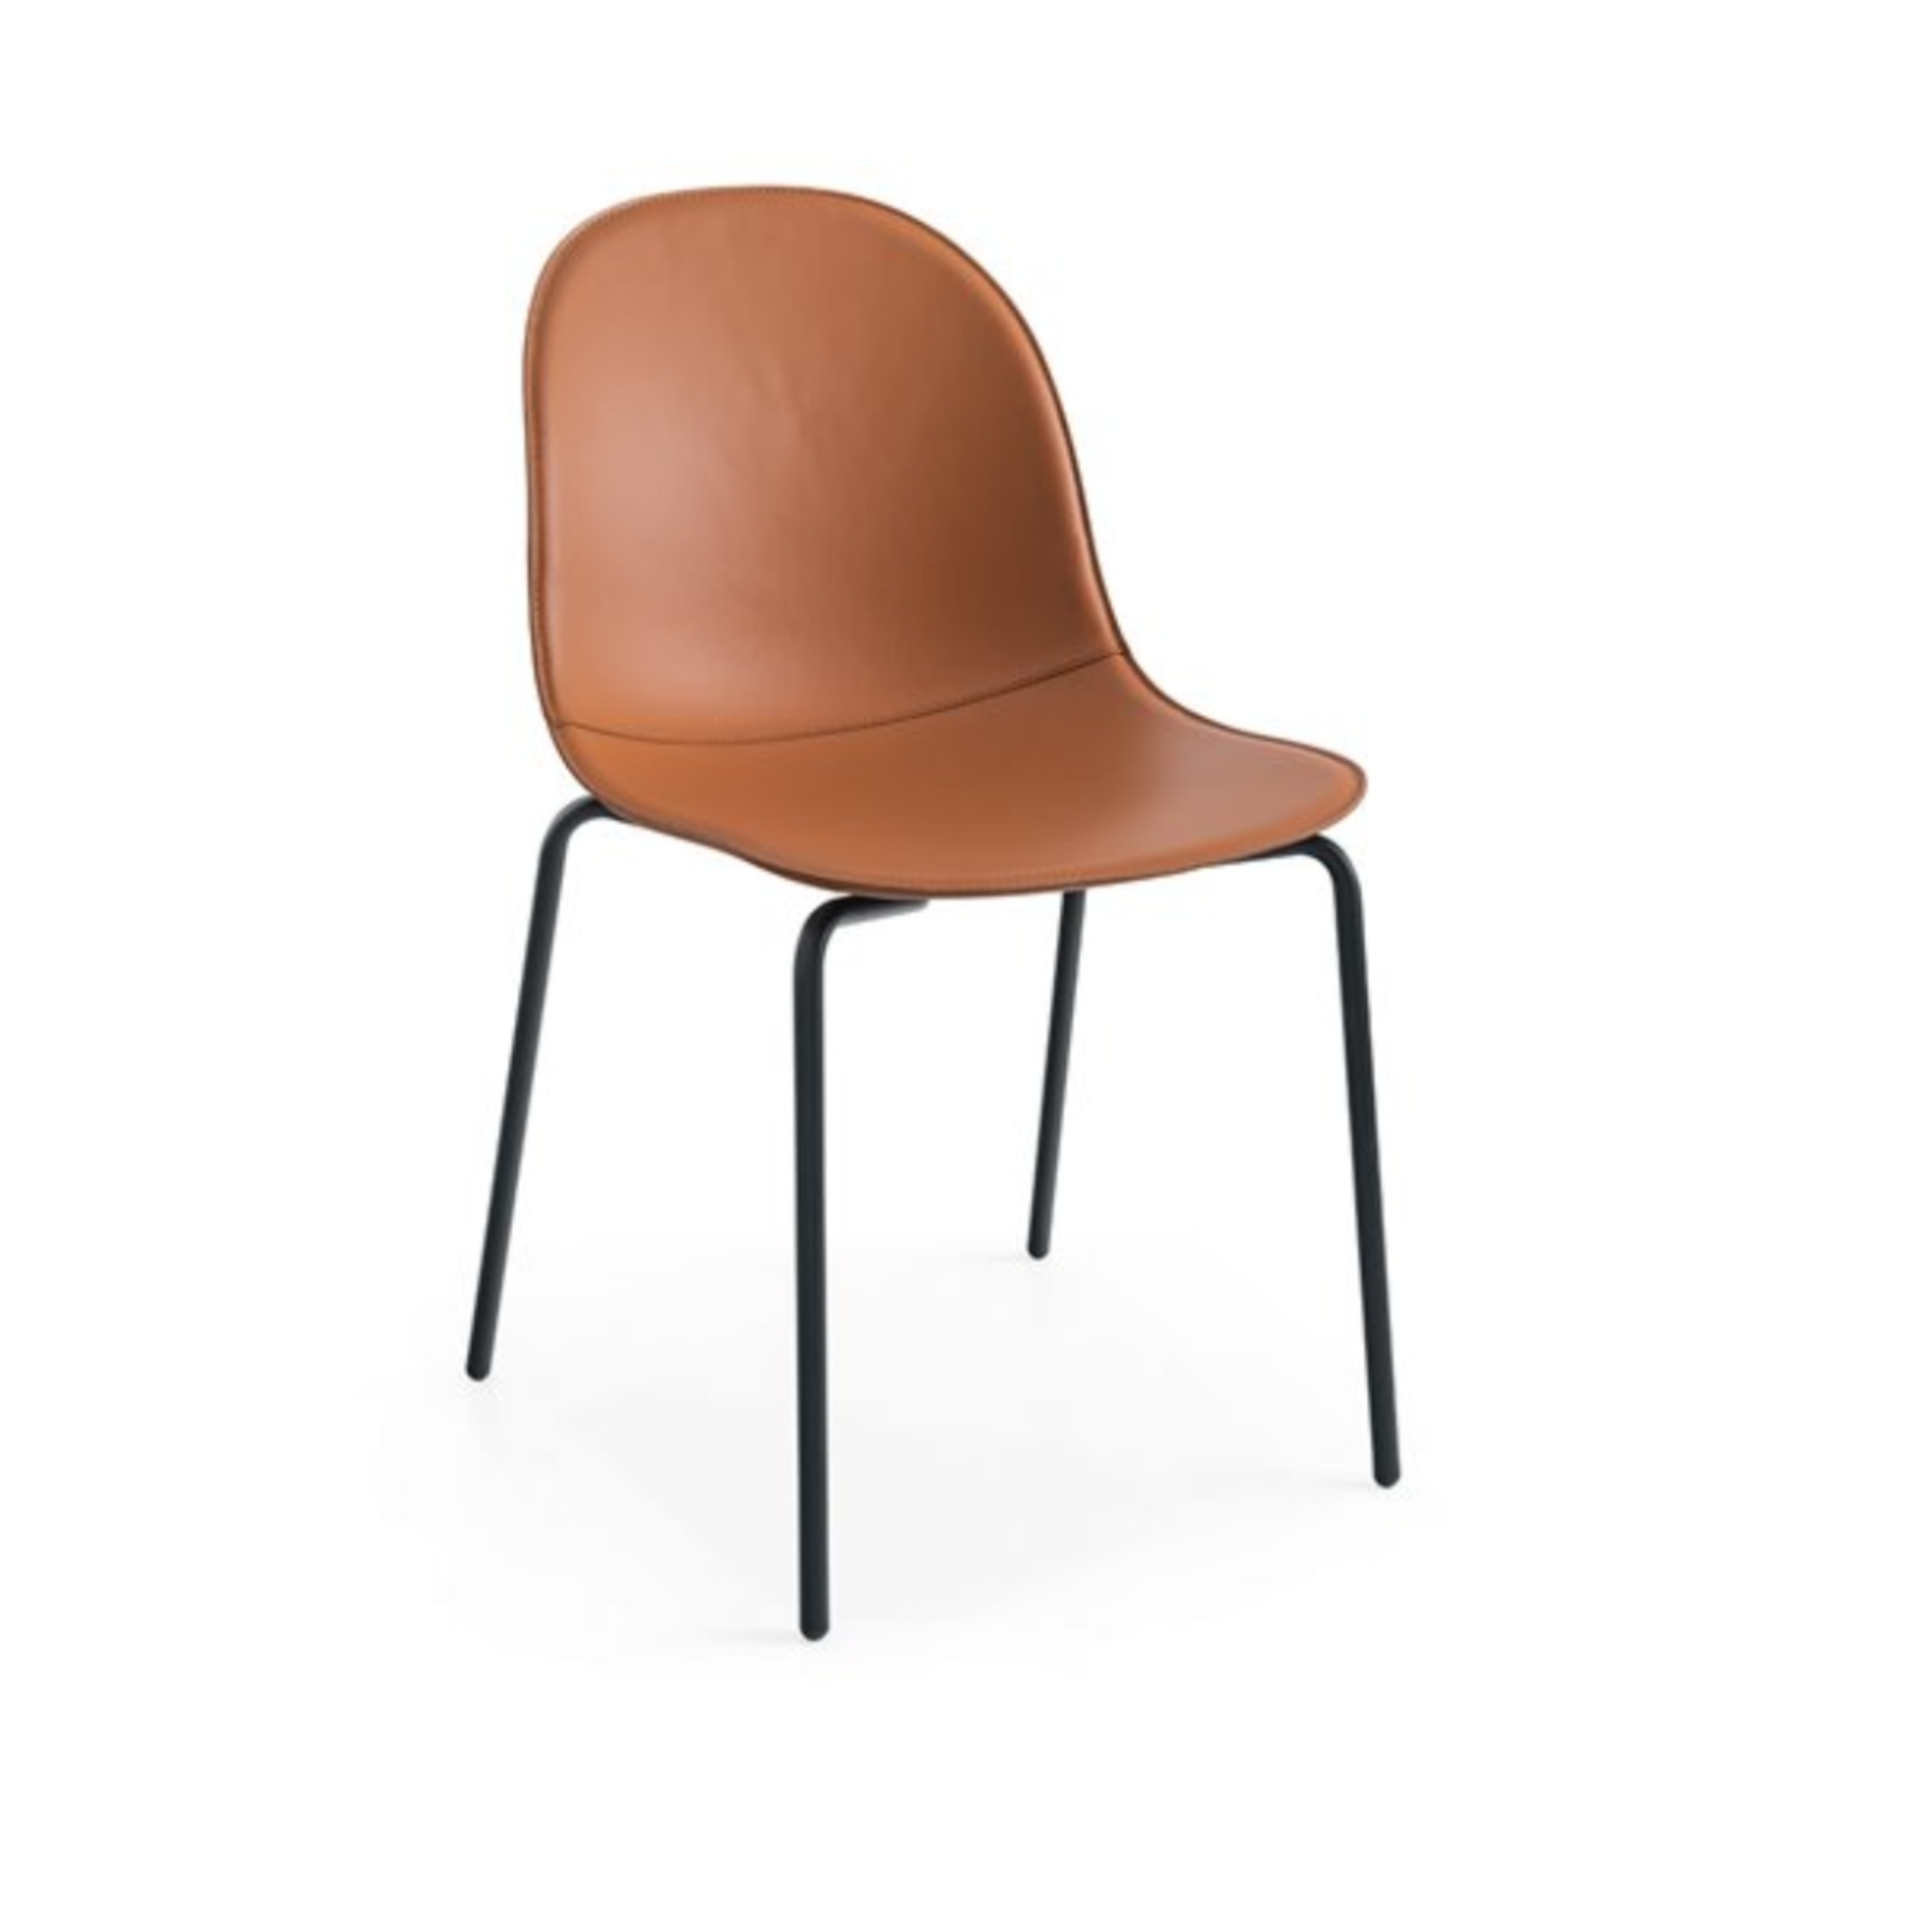 Cb/1663 Academy Chair by Connubia | Buy Academy Chair Online